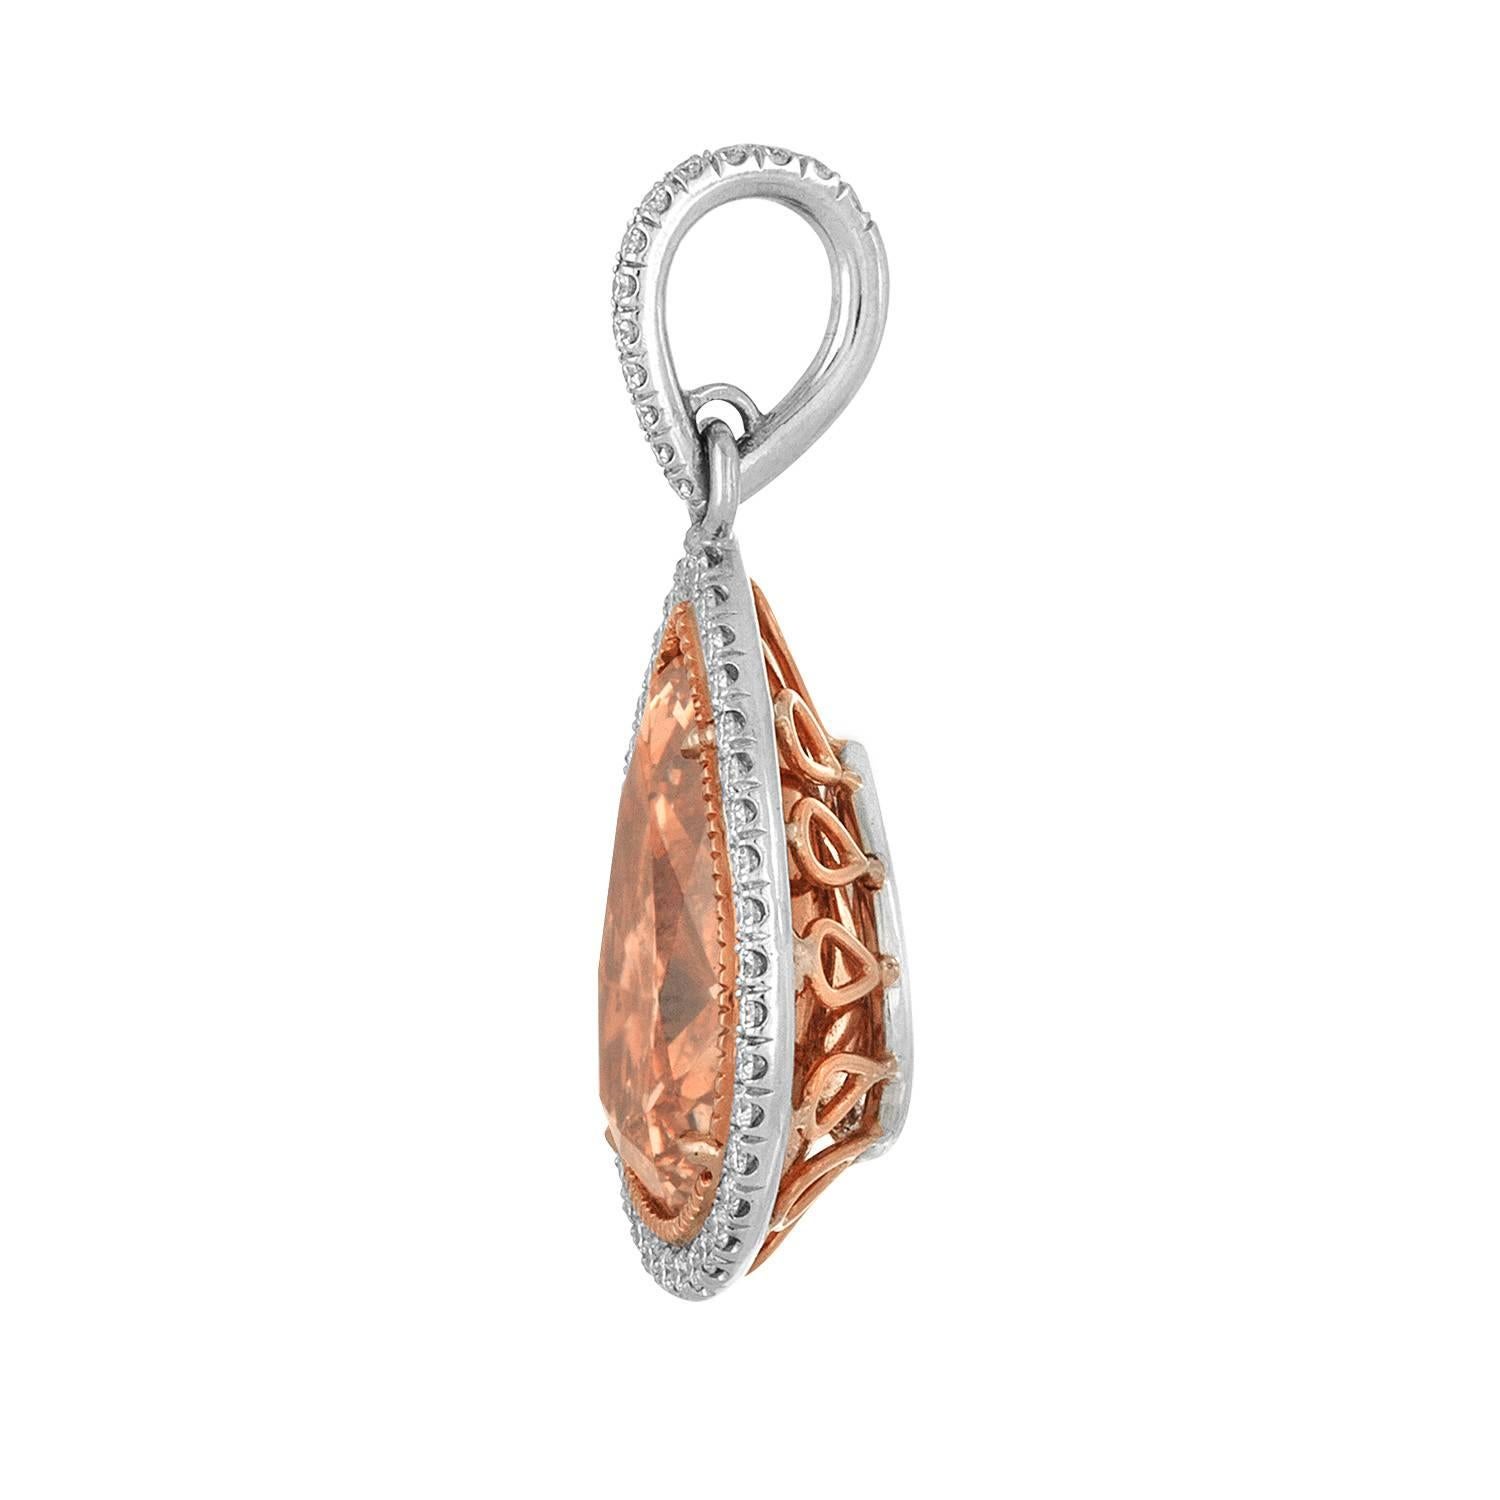 A spready looking 5.29 Carat Pear Shape GIA Certified Fancy Deep Brown Yellow SI2 is set in Rose Gold and Platinum Pendant mounting. 
This 5.29 Carat Pear Shape is set in hand crafted mounting surrounded by one raw of white melee. The white melee